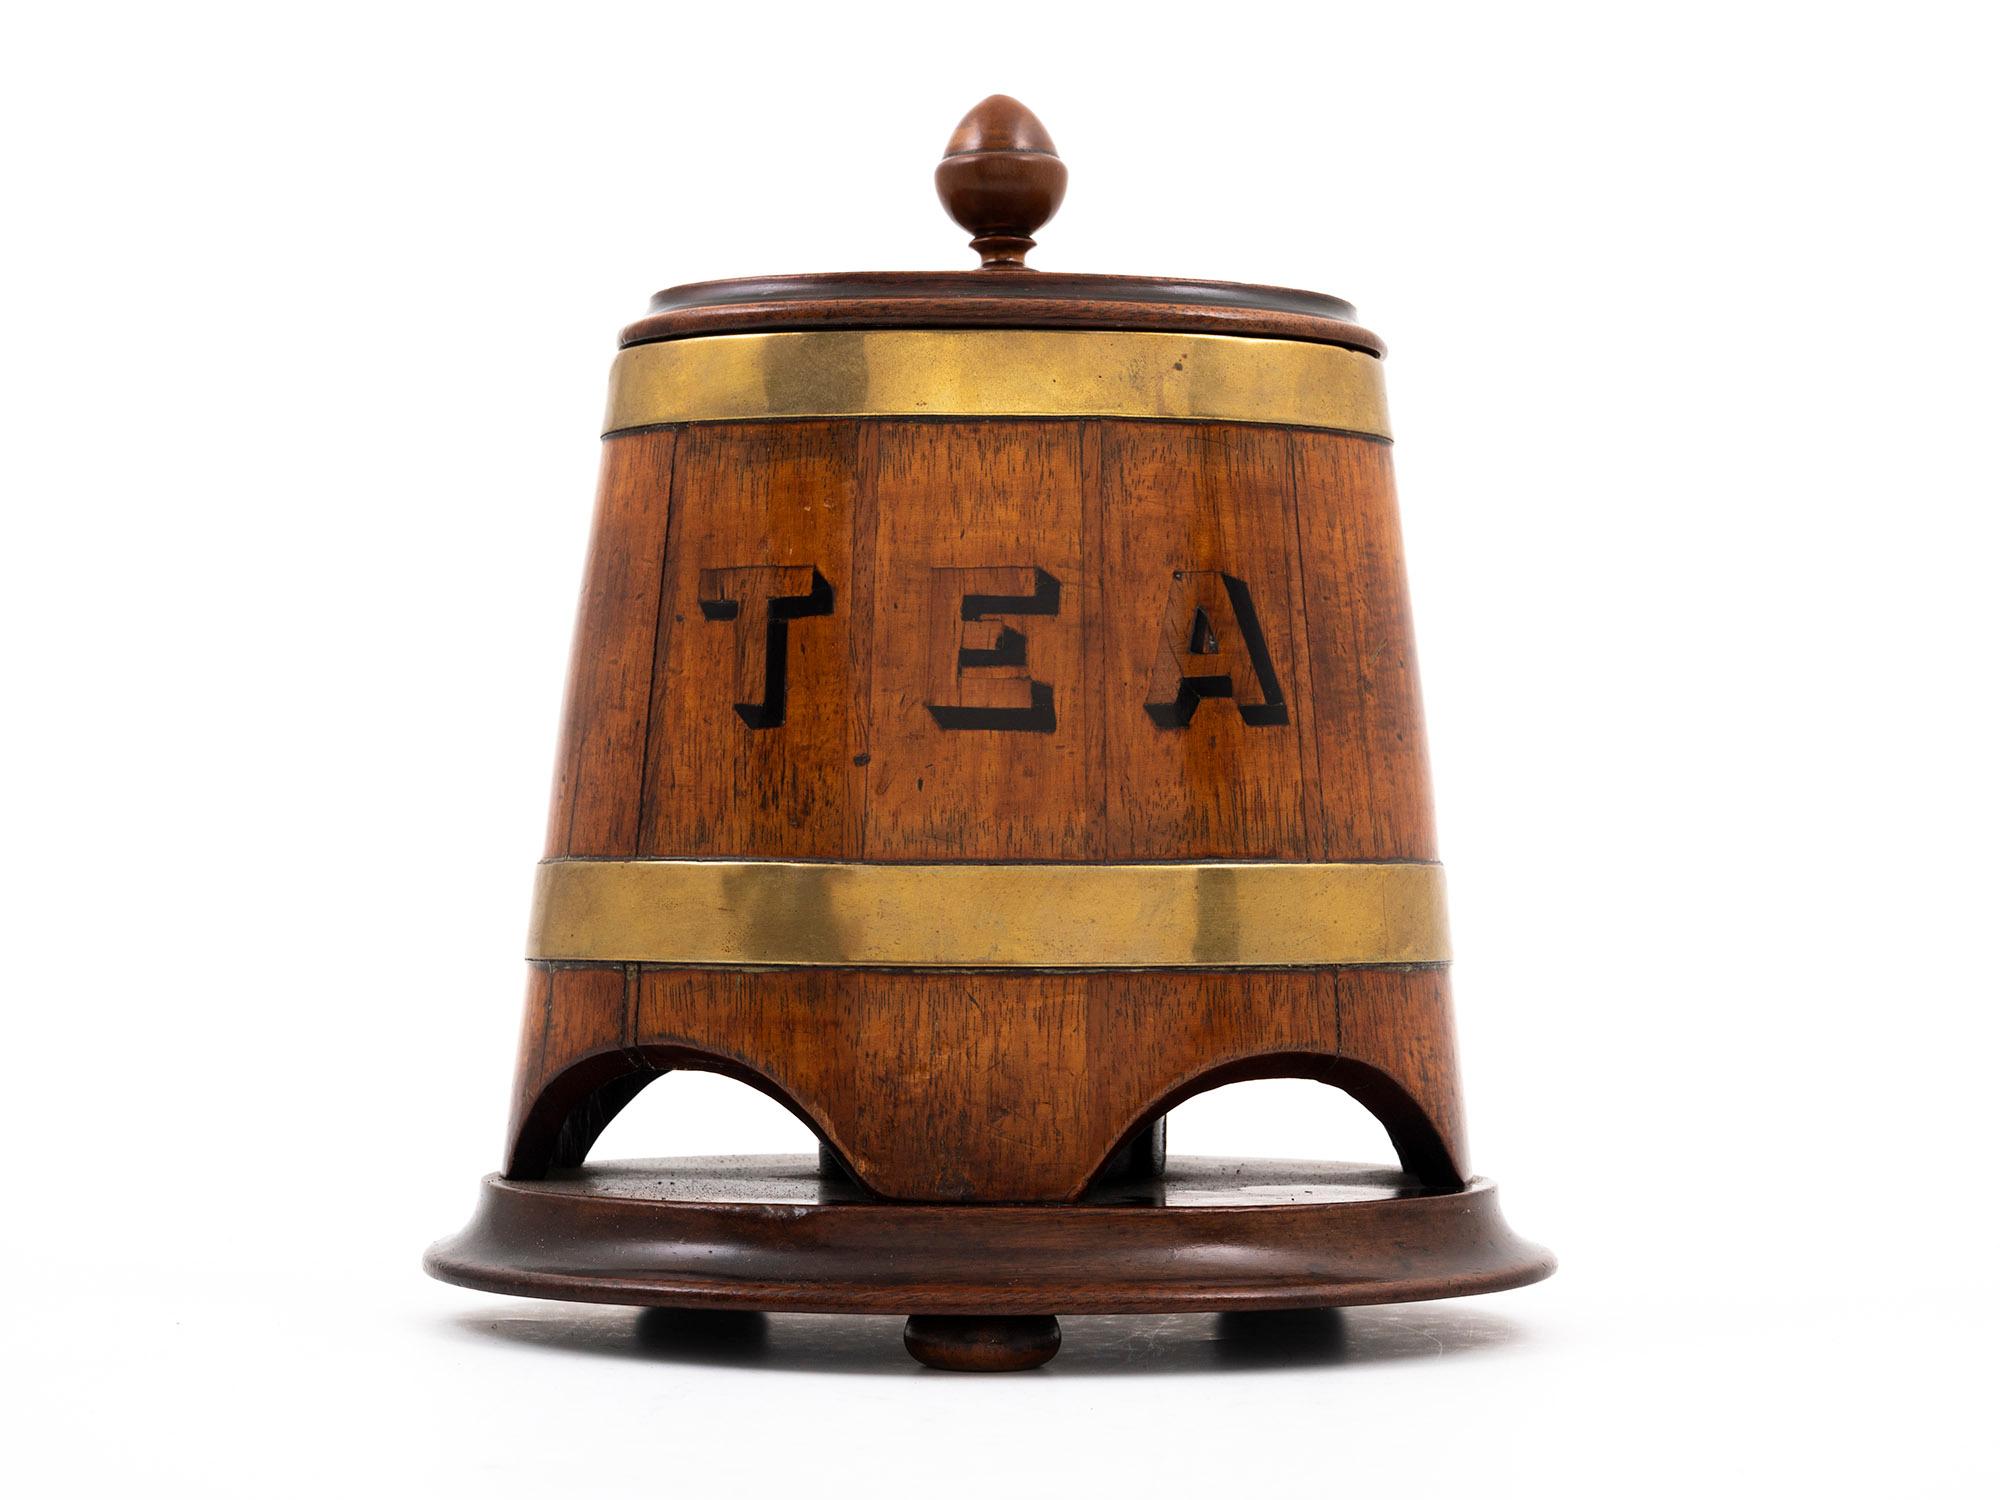 Coopered Barrel Advertising Tea Caddy For Sale 2